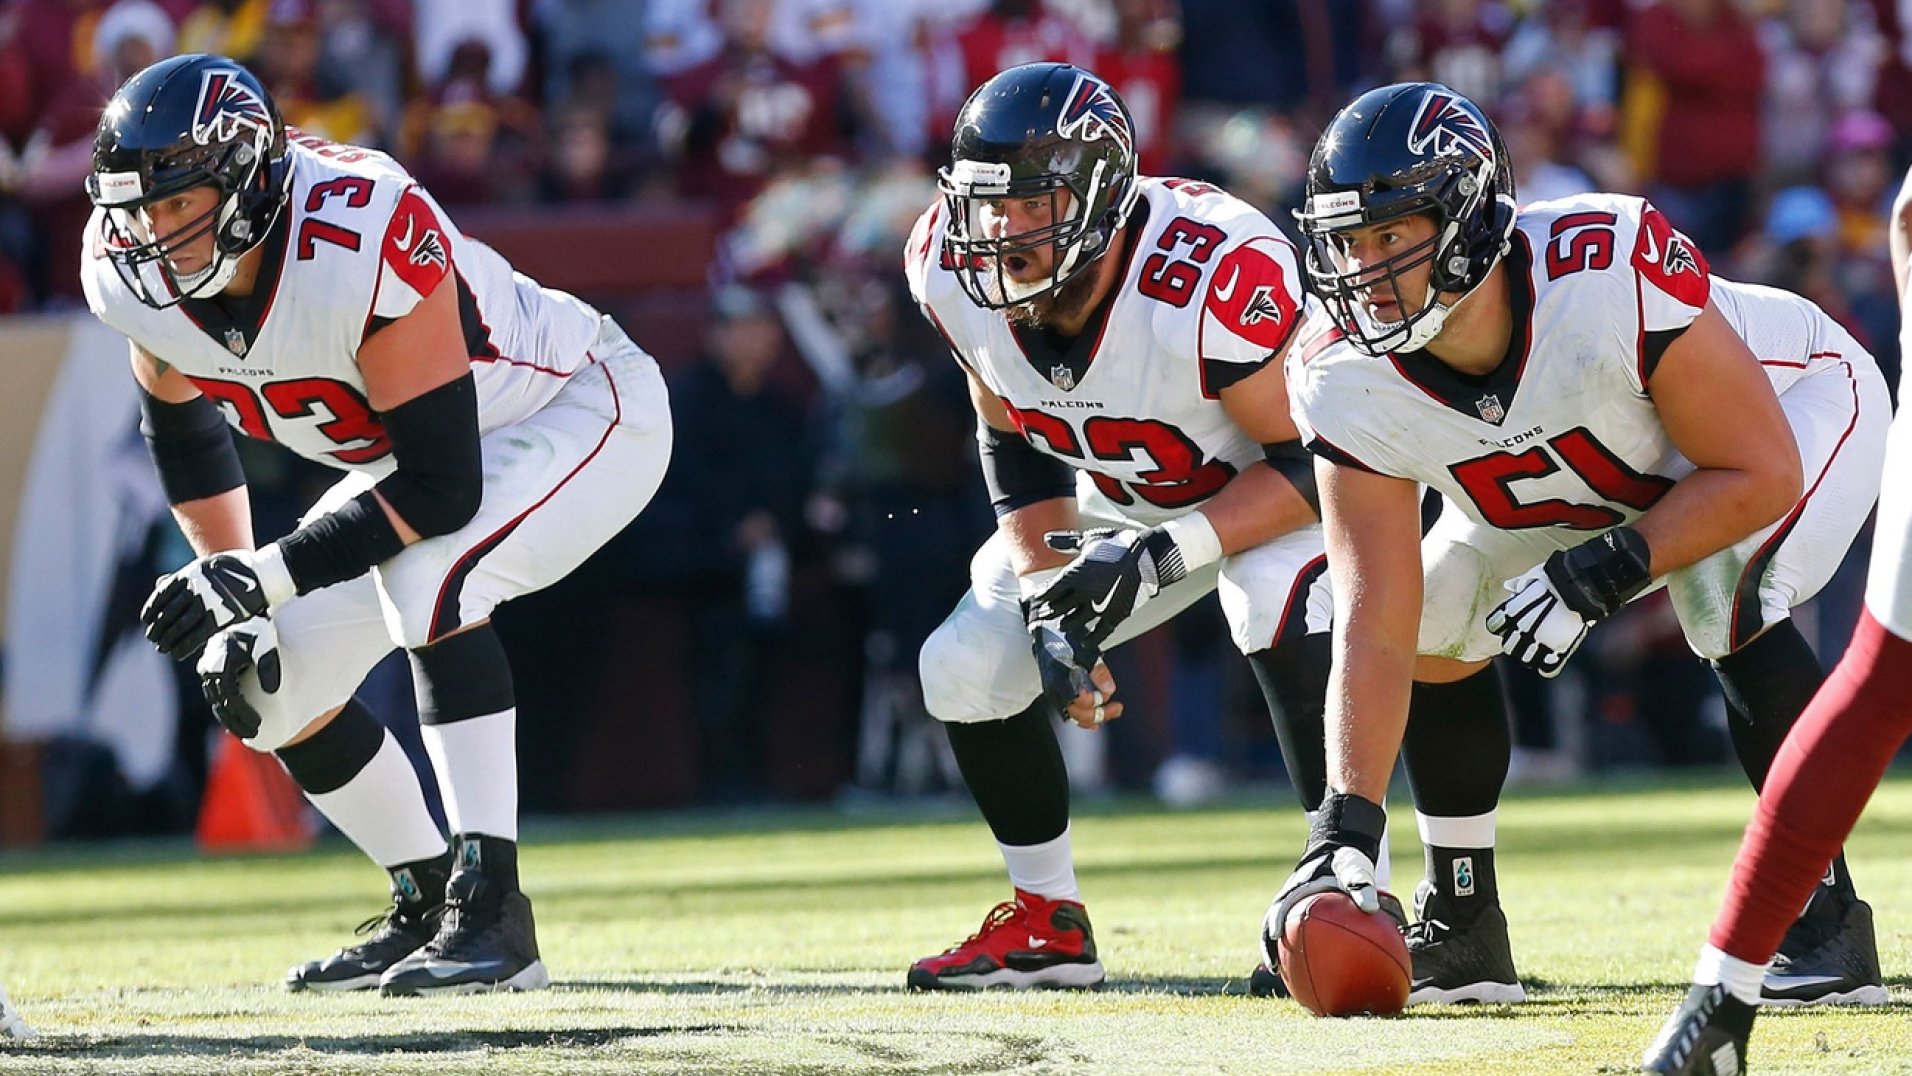 Ranking all 32 NFL offensive lines by passblocking efficiency on long